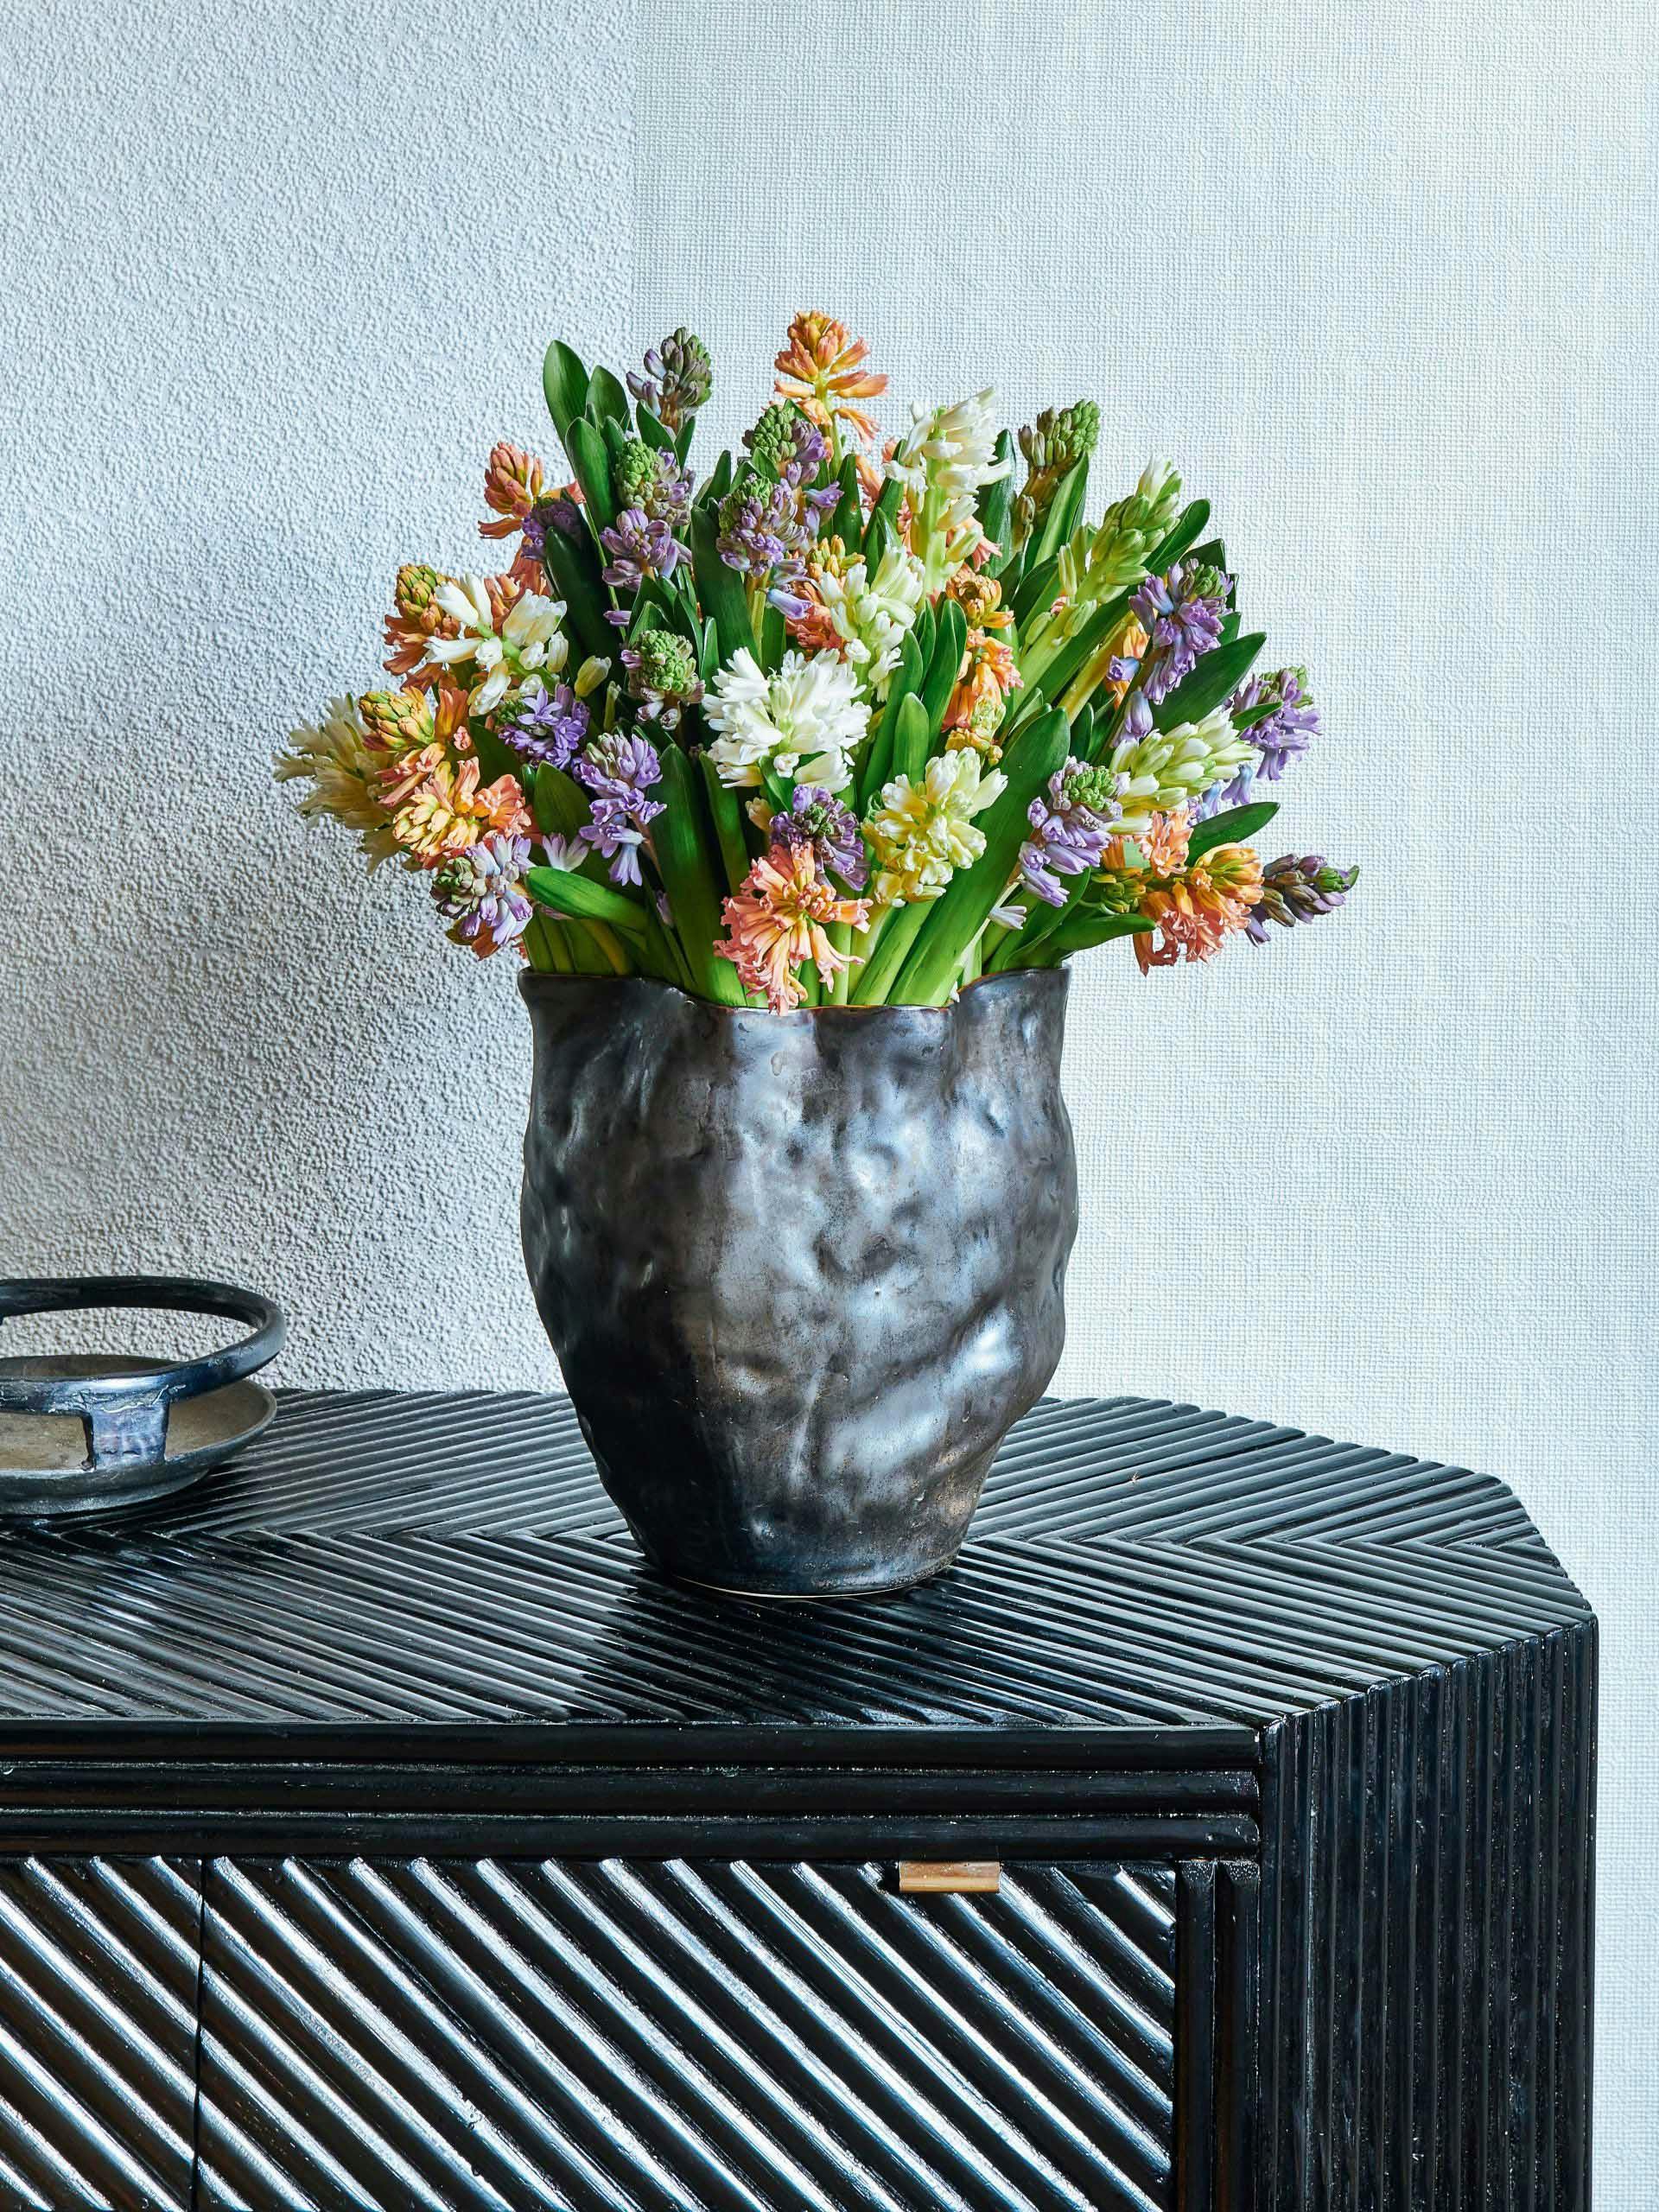 Hyacinth flower bouquet and vase